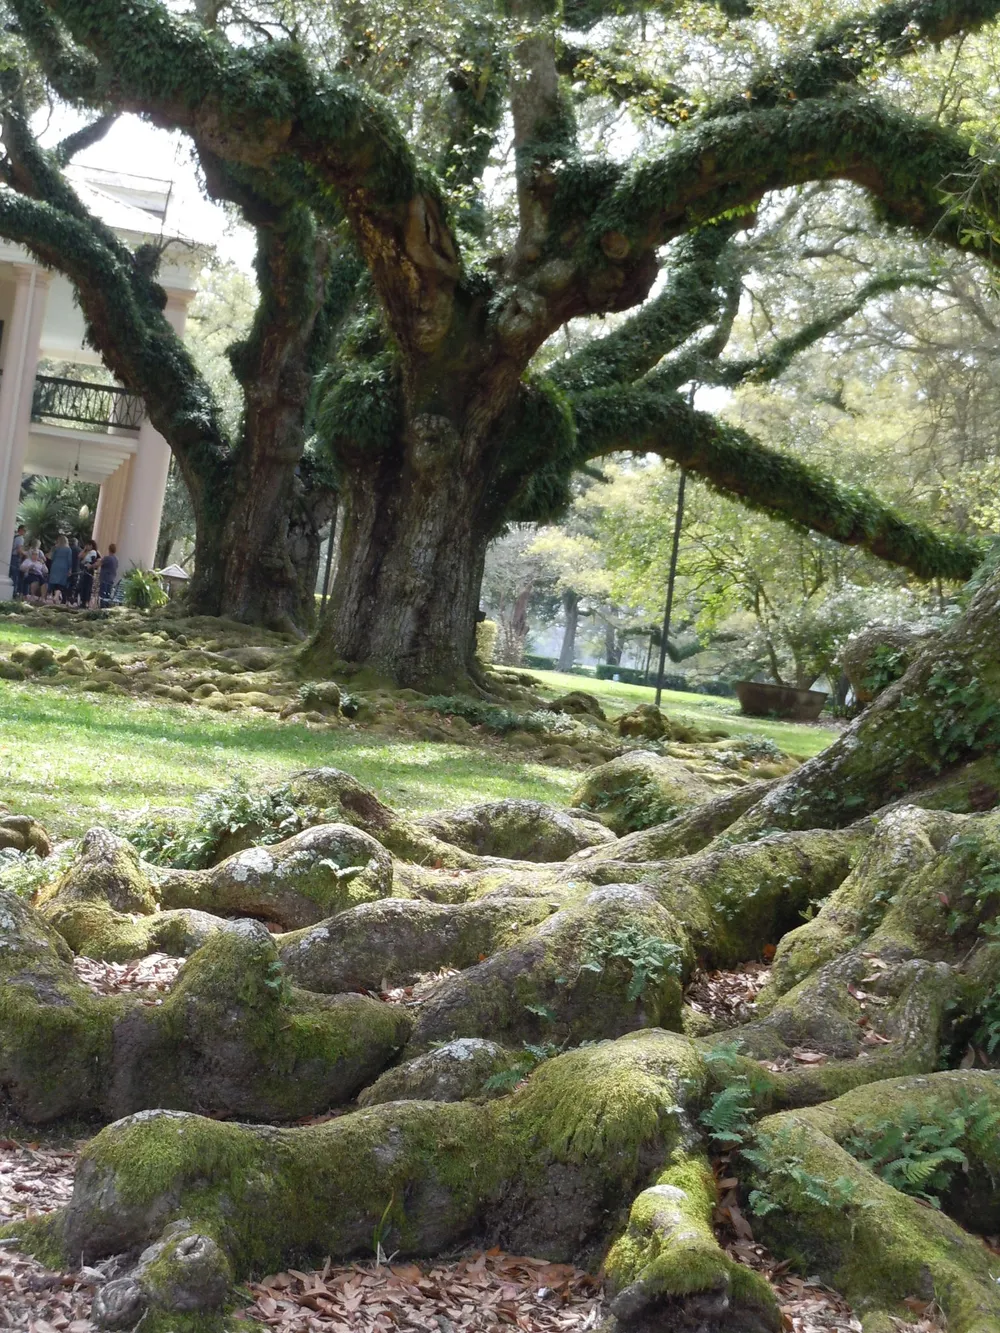 The image showcases a majestic moss-covered tree with sprawling roots in a lush environment possibly a park or garden